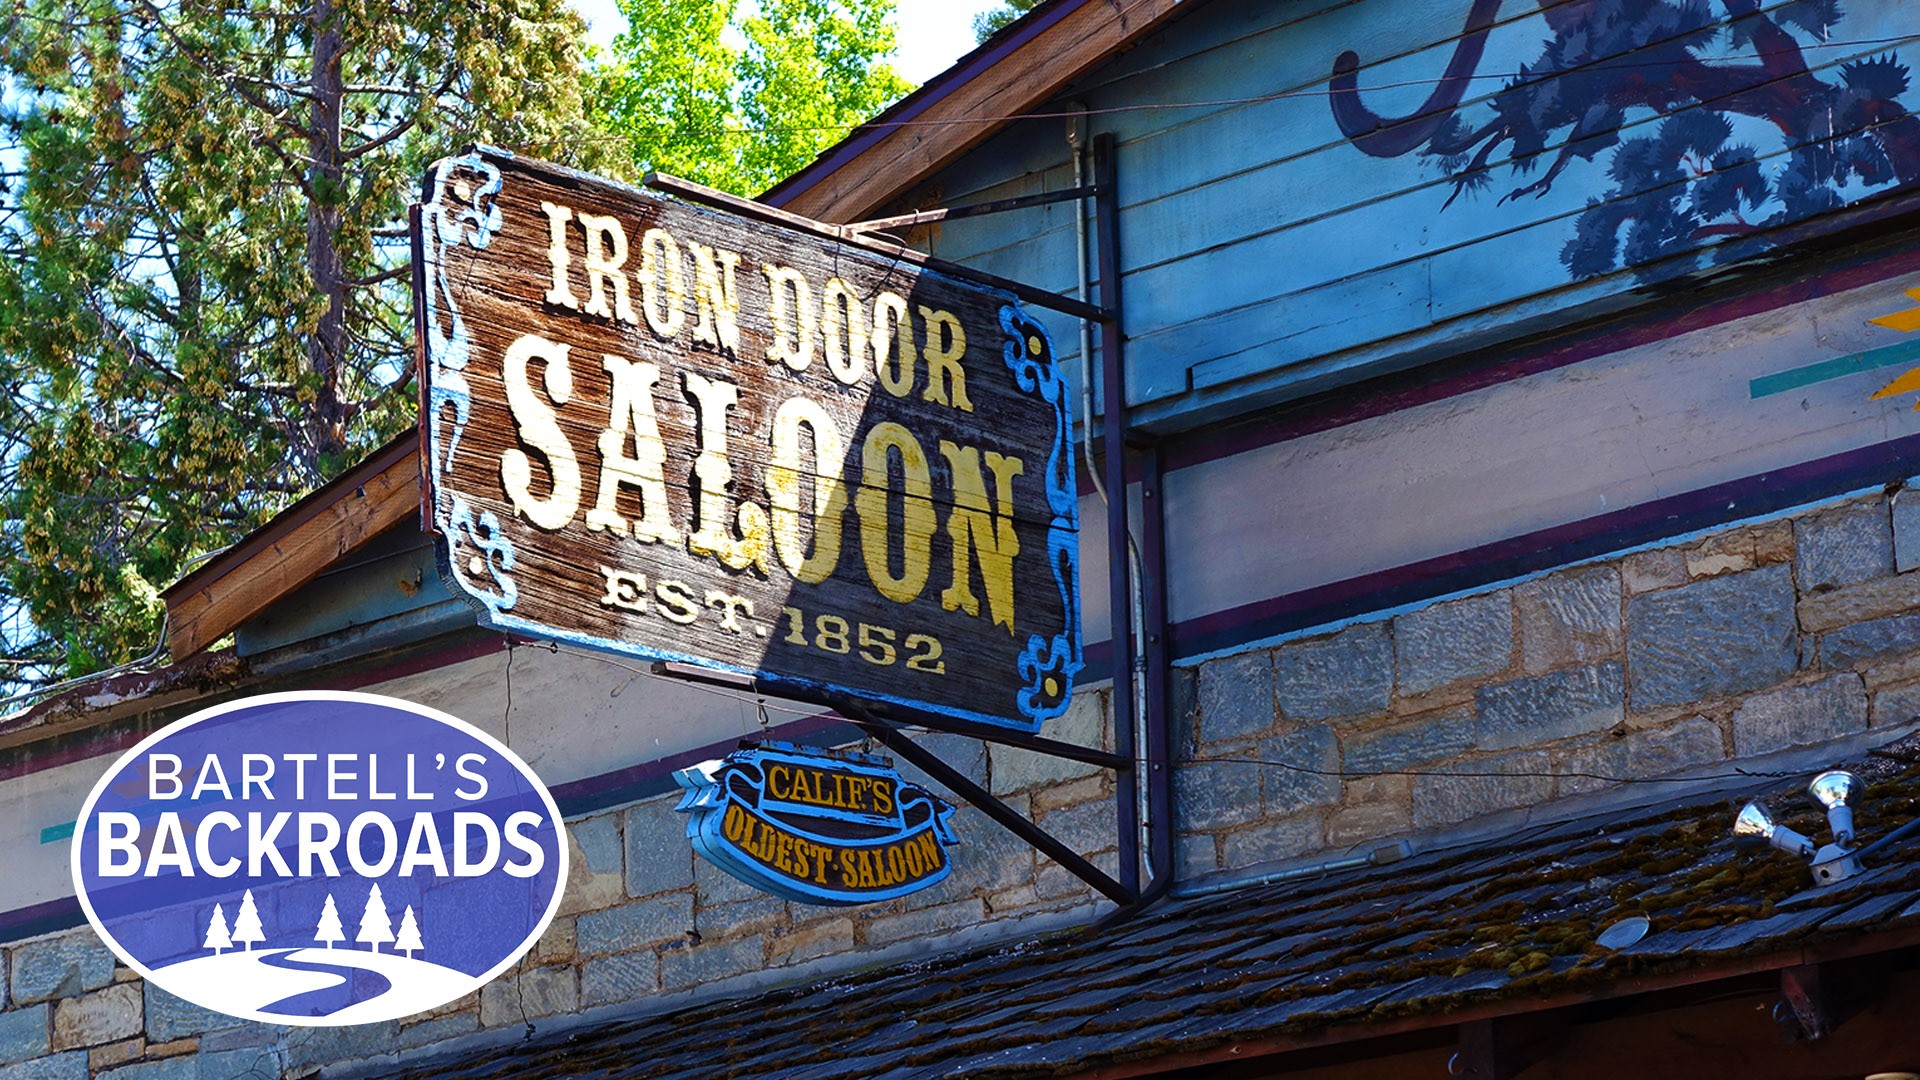 Iron Door Saloon in Groveland claims it's 'California’s oldest continuously operating bar.' True or not, grab a drink at this historic saloon.